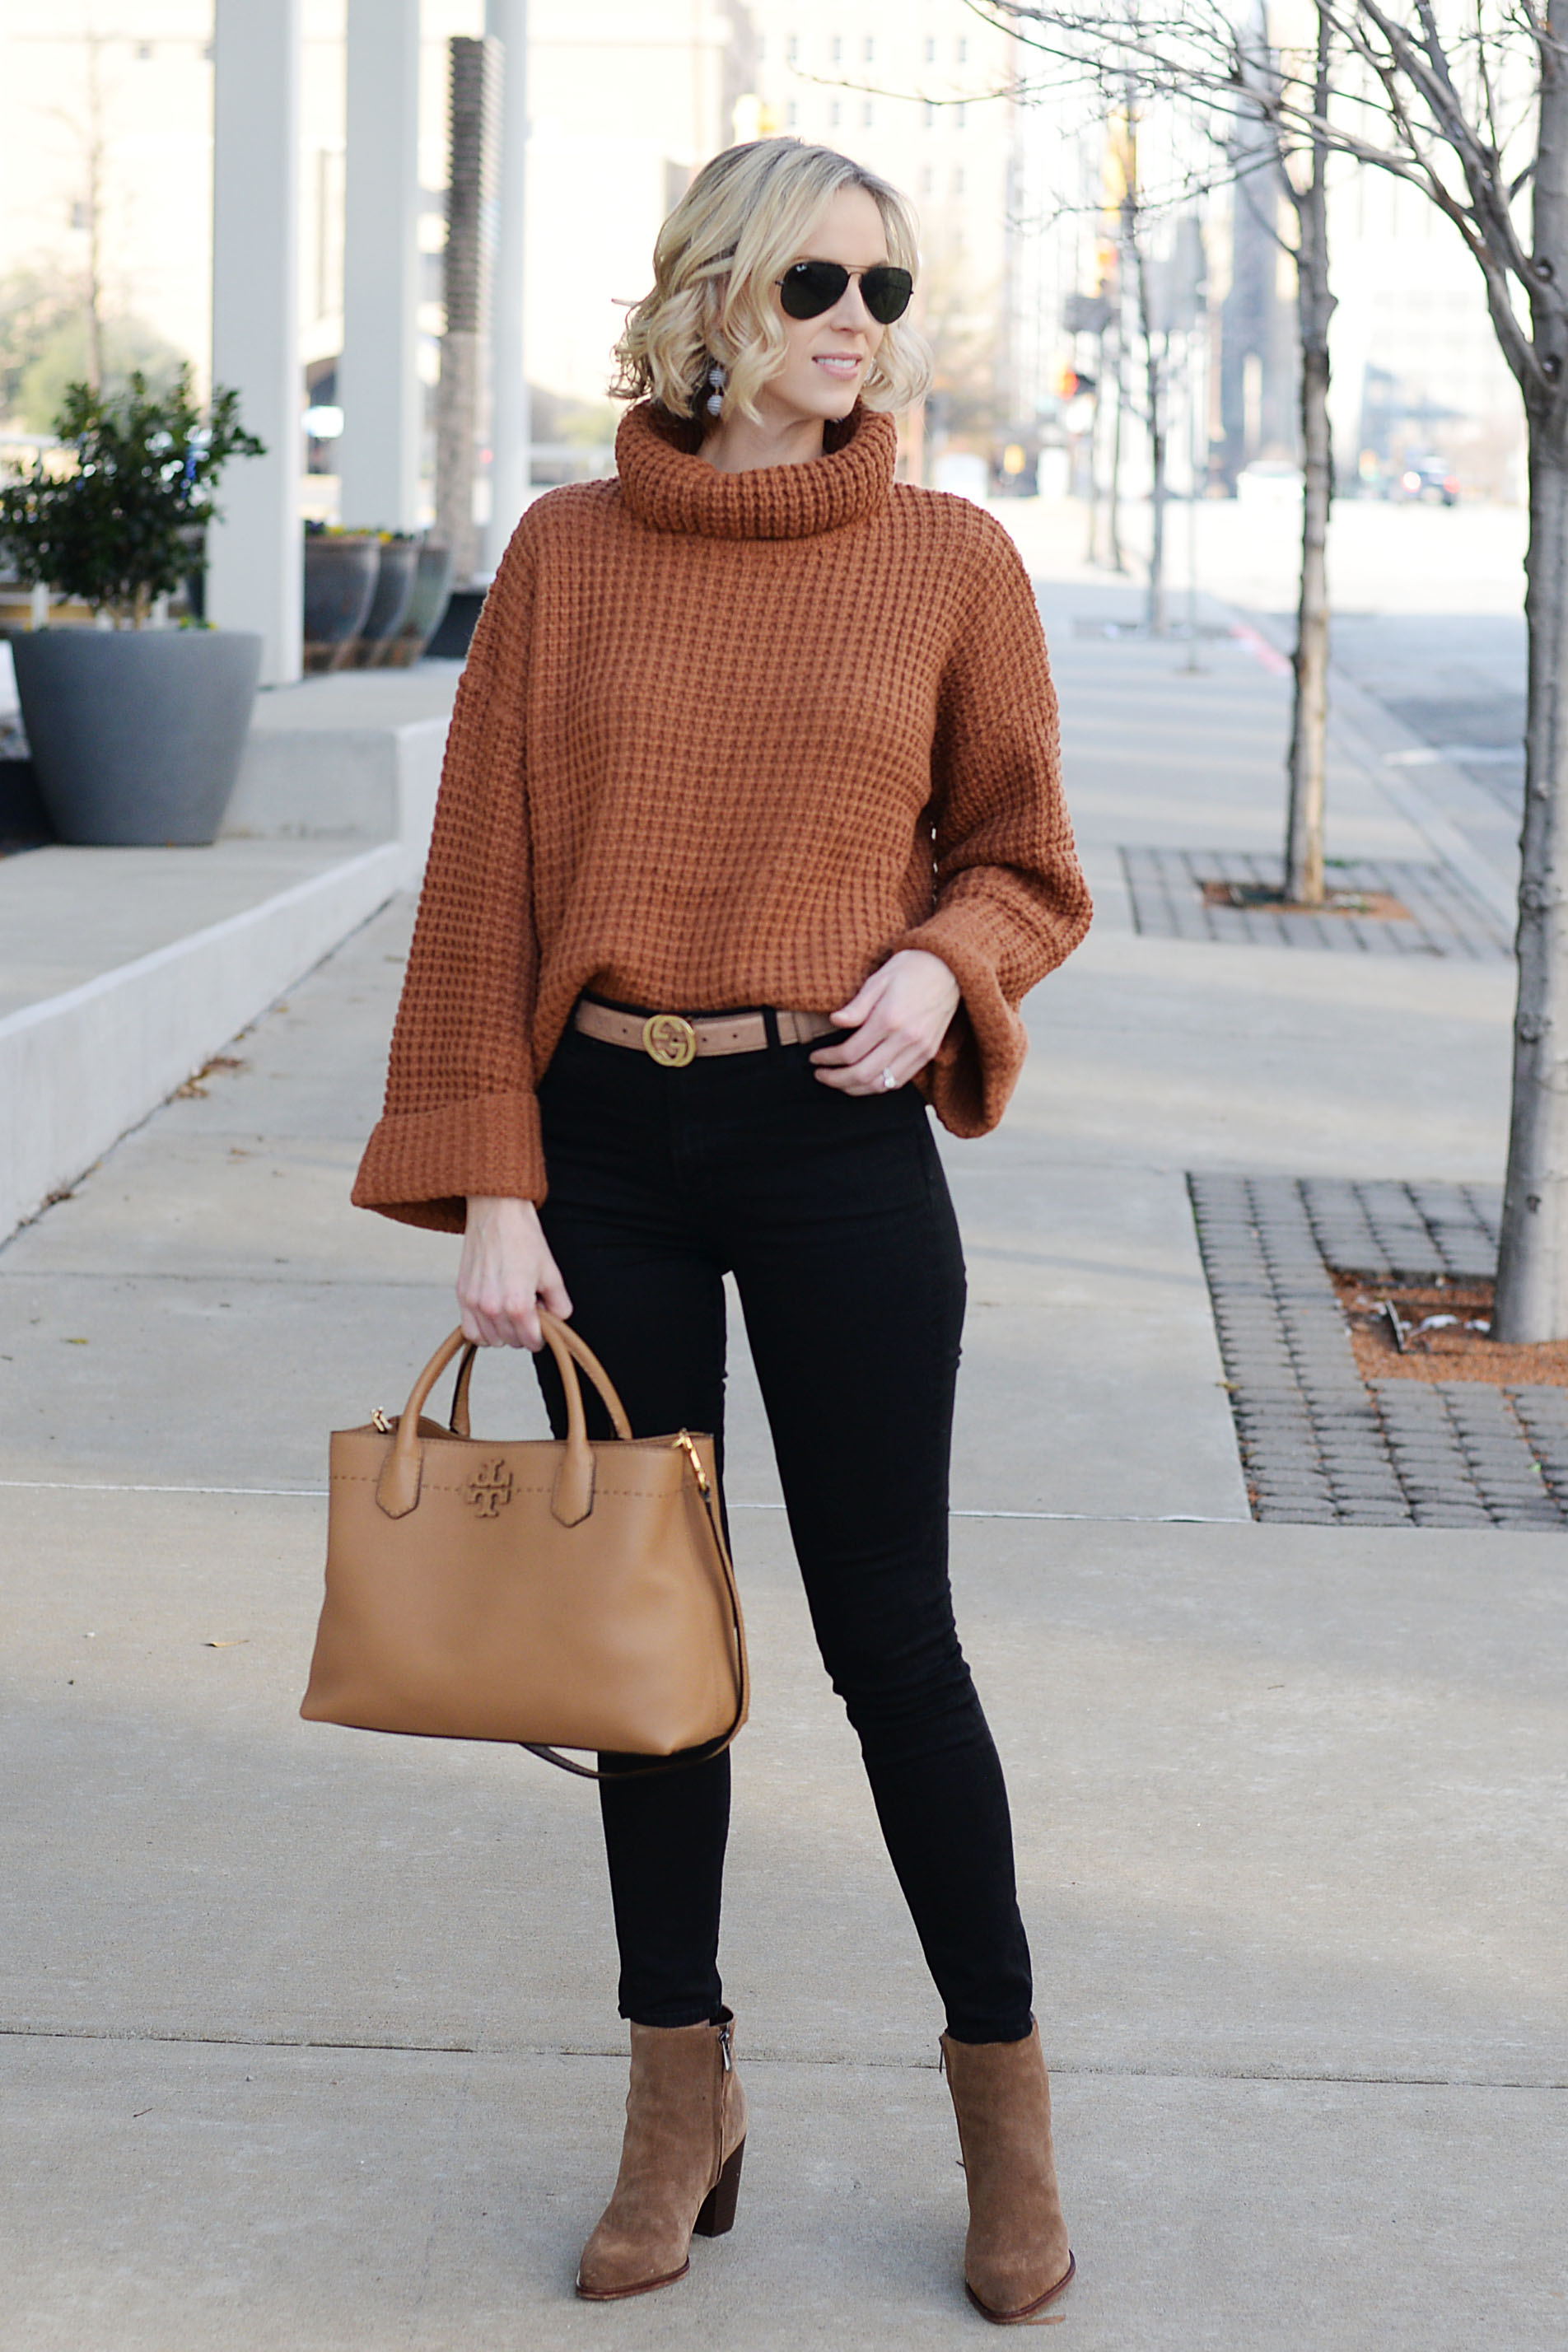 The Coziest Waffle Knit Sweater - Only $28 - Straight A Style